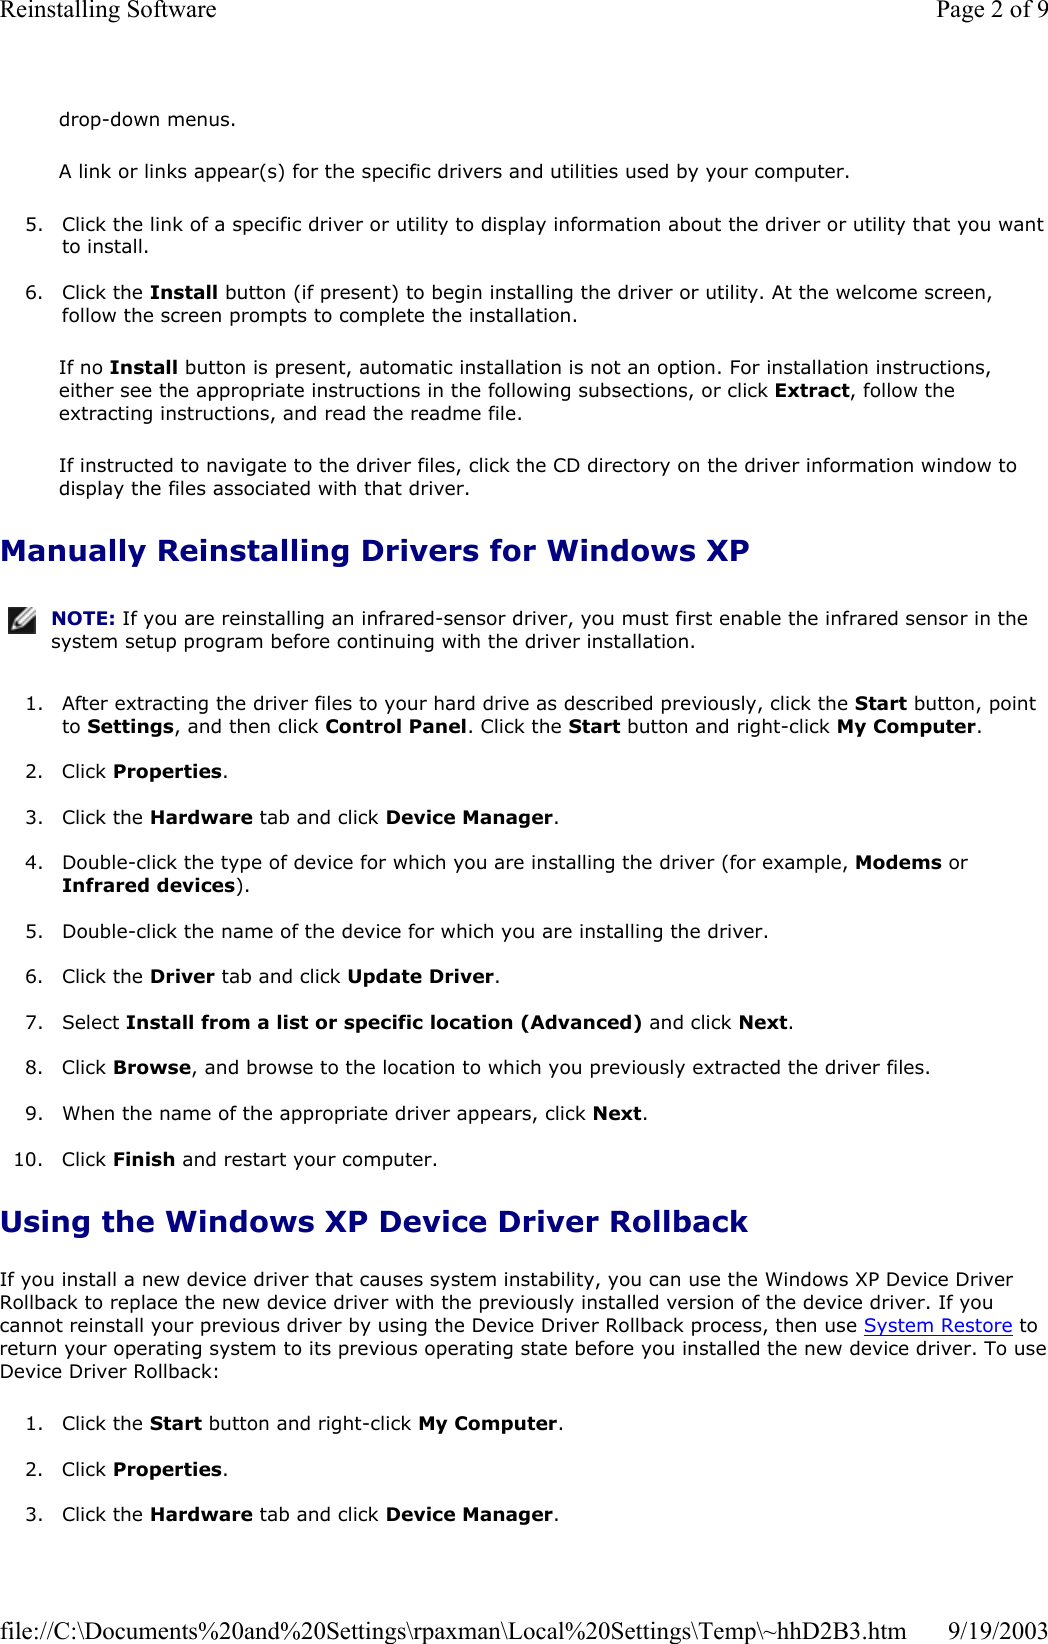 drop-down menus. A link or links appear(s) for the specific drivers and utilities used by your computer. 5. Click the link of a specific driver or utility to display information about the driver or utility that you want to install.  6. Click the Install button (if present) to begin installing the driver or utility. At the welcome screen, follow the screen prompts to complete the installation.  If no Install button is present, automatic installation is not an option. For installation instructions, either see the appropriate instructions in the following subsections, or click Extract, follow the extracting instructions, and read the readme file. If instructed to navigate to the driver files, click the CD directory on the driver information window to display the files associated with that driver. Manually Reinstalling Drivers for Windows XP  1. After extracting the driver files to your hard drive as described previously, click the Start button, point to Settings, and then click Control Panel. Click the Start button and right-click My Computer.  2. Click Properties.  3. Click the Hardware tab and click Device Manager.  4. Double-click the type of device for which you are installing the driver (for example, Modems or Infrared devices).  5. Double-click the name of the device for which you are installing the driver.  6. Click the Driver tab and click Update Driver.  7. Select Install from a list or specific location (Advanced) and click Next.  8. Click Browse, and browse to the location to which you previously extracted the driver files.  9. When the name of the appropriate driver appears, click Next.   10. Click Finish and restart your computer.  Using the Windows XP Device Driver Rollback If you install a new device driver that causes system instability, you can use the Windows XP Device Driver Rollback to replace the new device driver with the previously installed version of the device driver. If you cannot reinstall your previous driver by using the Device Driver Rollback process, then use System Restore to return your operating system to its previous operating state before you installed the new device driver. To use Device Driver Rollback: 1. Click the Start button and right-click My Computer.  2. Click Properties.  3. Click the Hardware tab and click Device Manager. NOTE: If you are reinstalling an infrared-sensor driver, you must first enable the infrared sensor in the system setup program before continuing with the driver installation.Page 2 of 9Reinstalling Software9/19/2003file://C:\Documents%20and%20Settings\rpaxman\Local%20Settings\Temp\~hhD2B3.htm